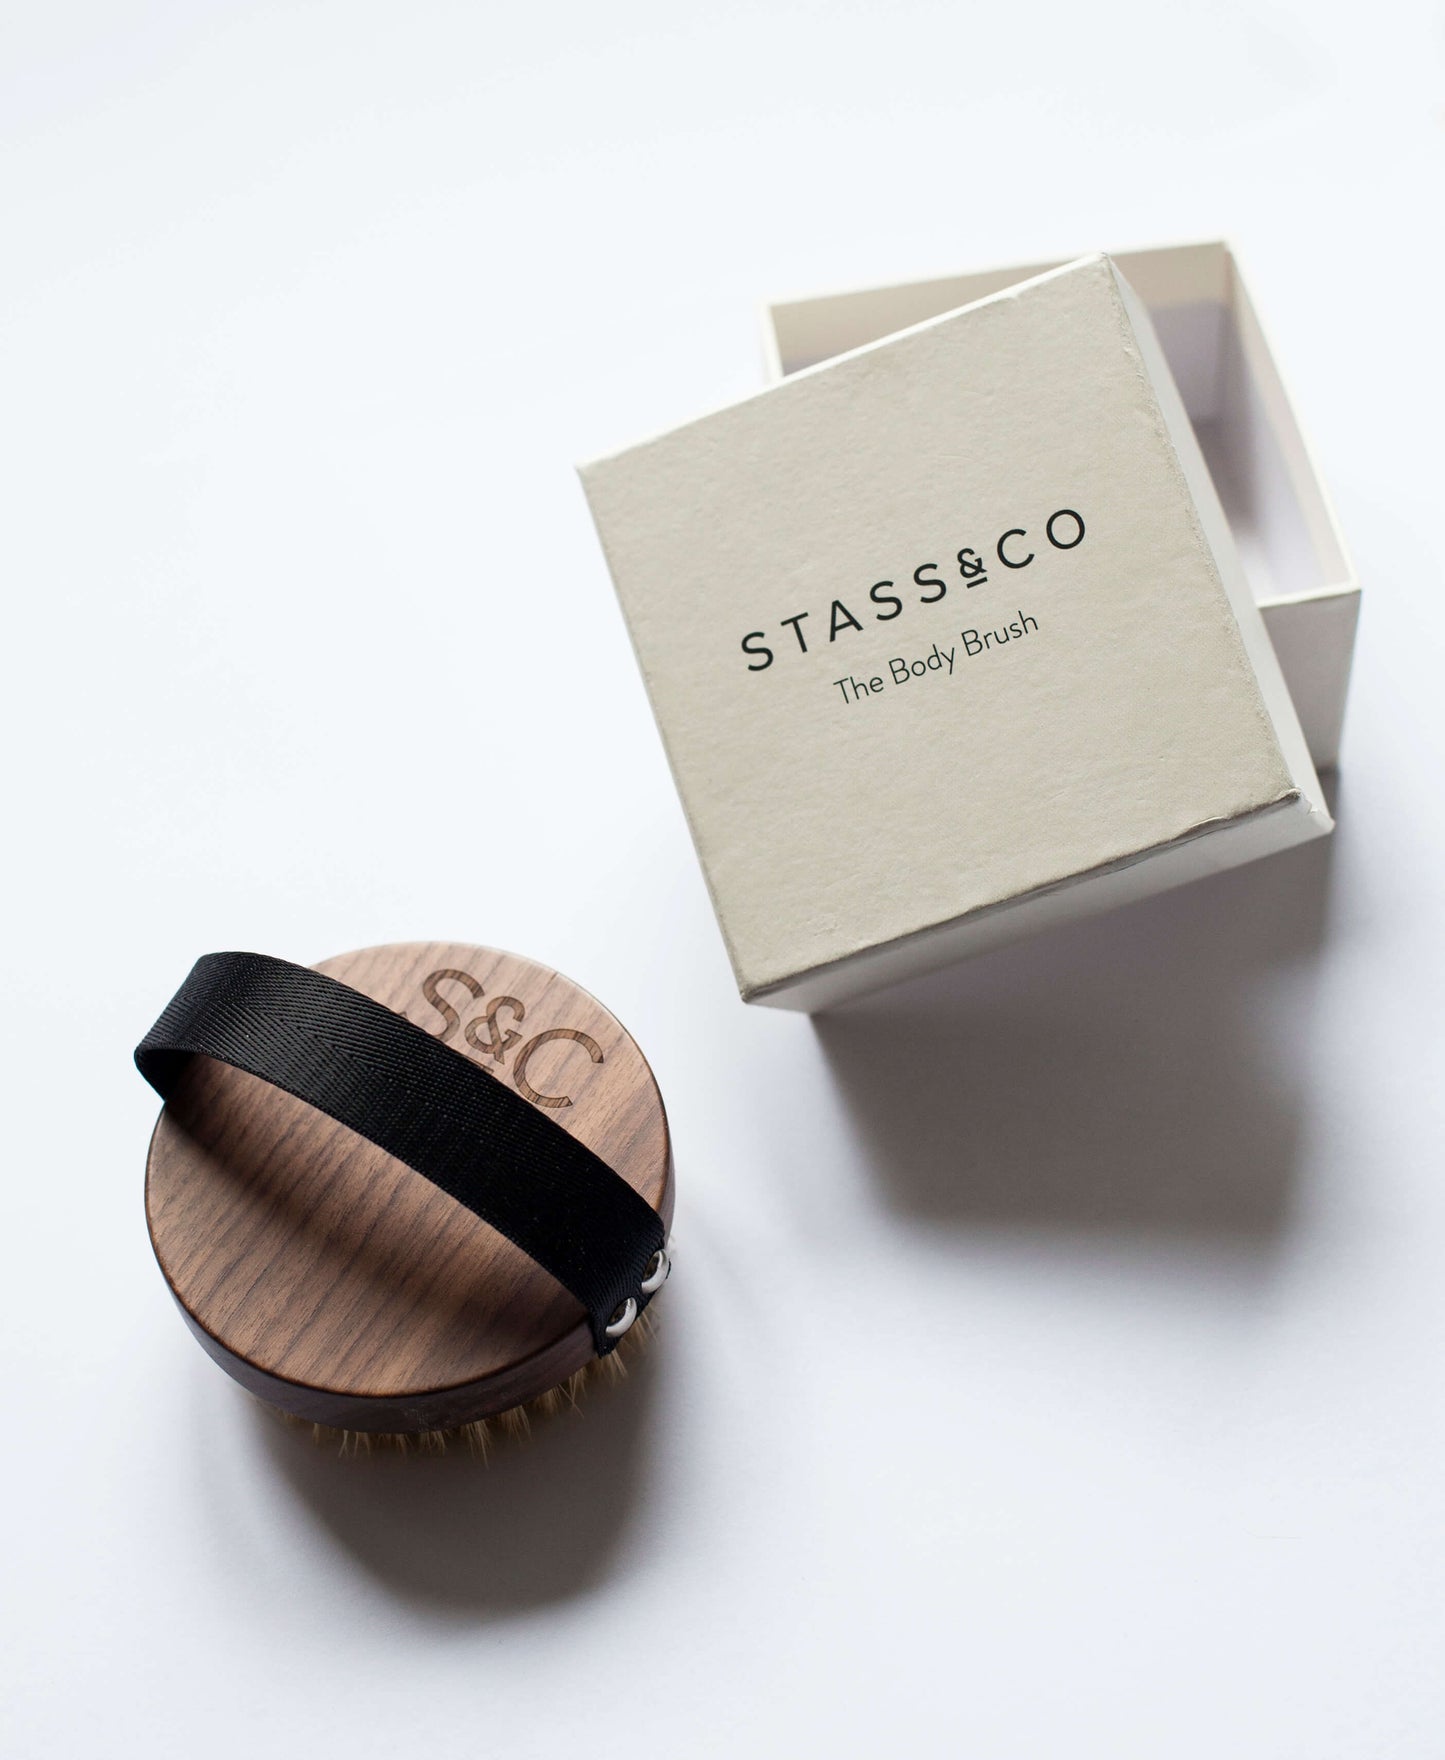 Stass & Co dry body brush with white product box.